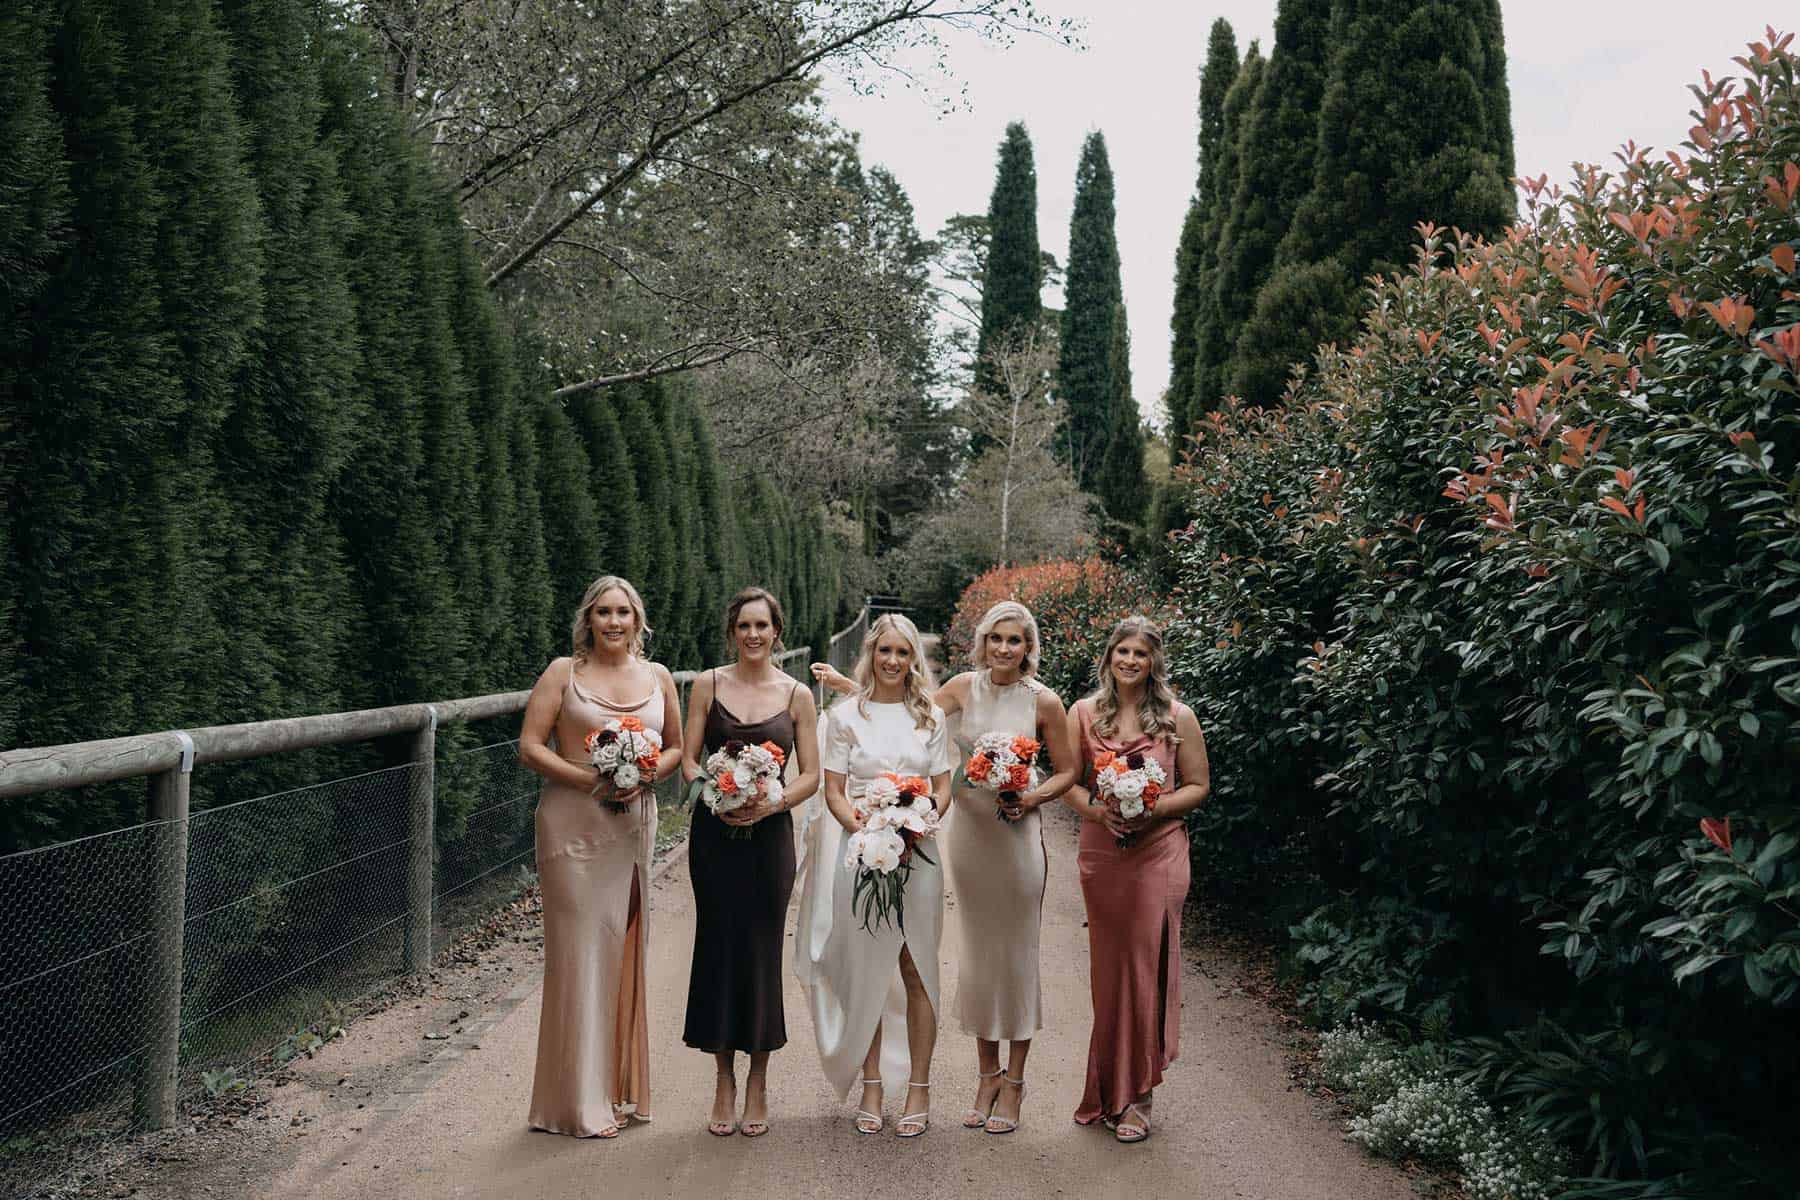 blush and neutral toned bridesmaid dresses